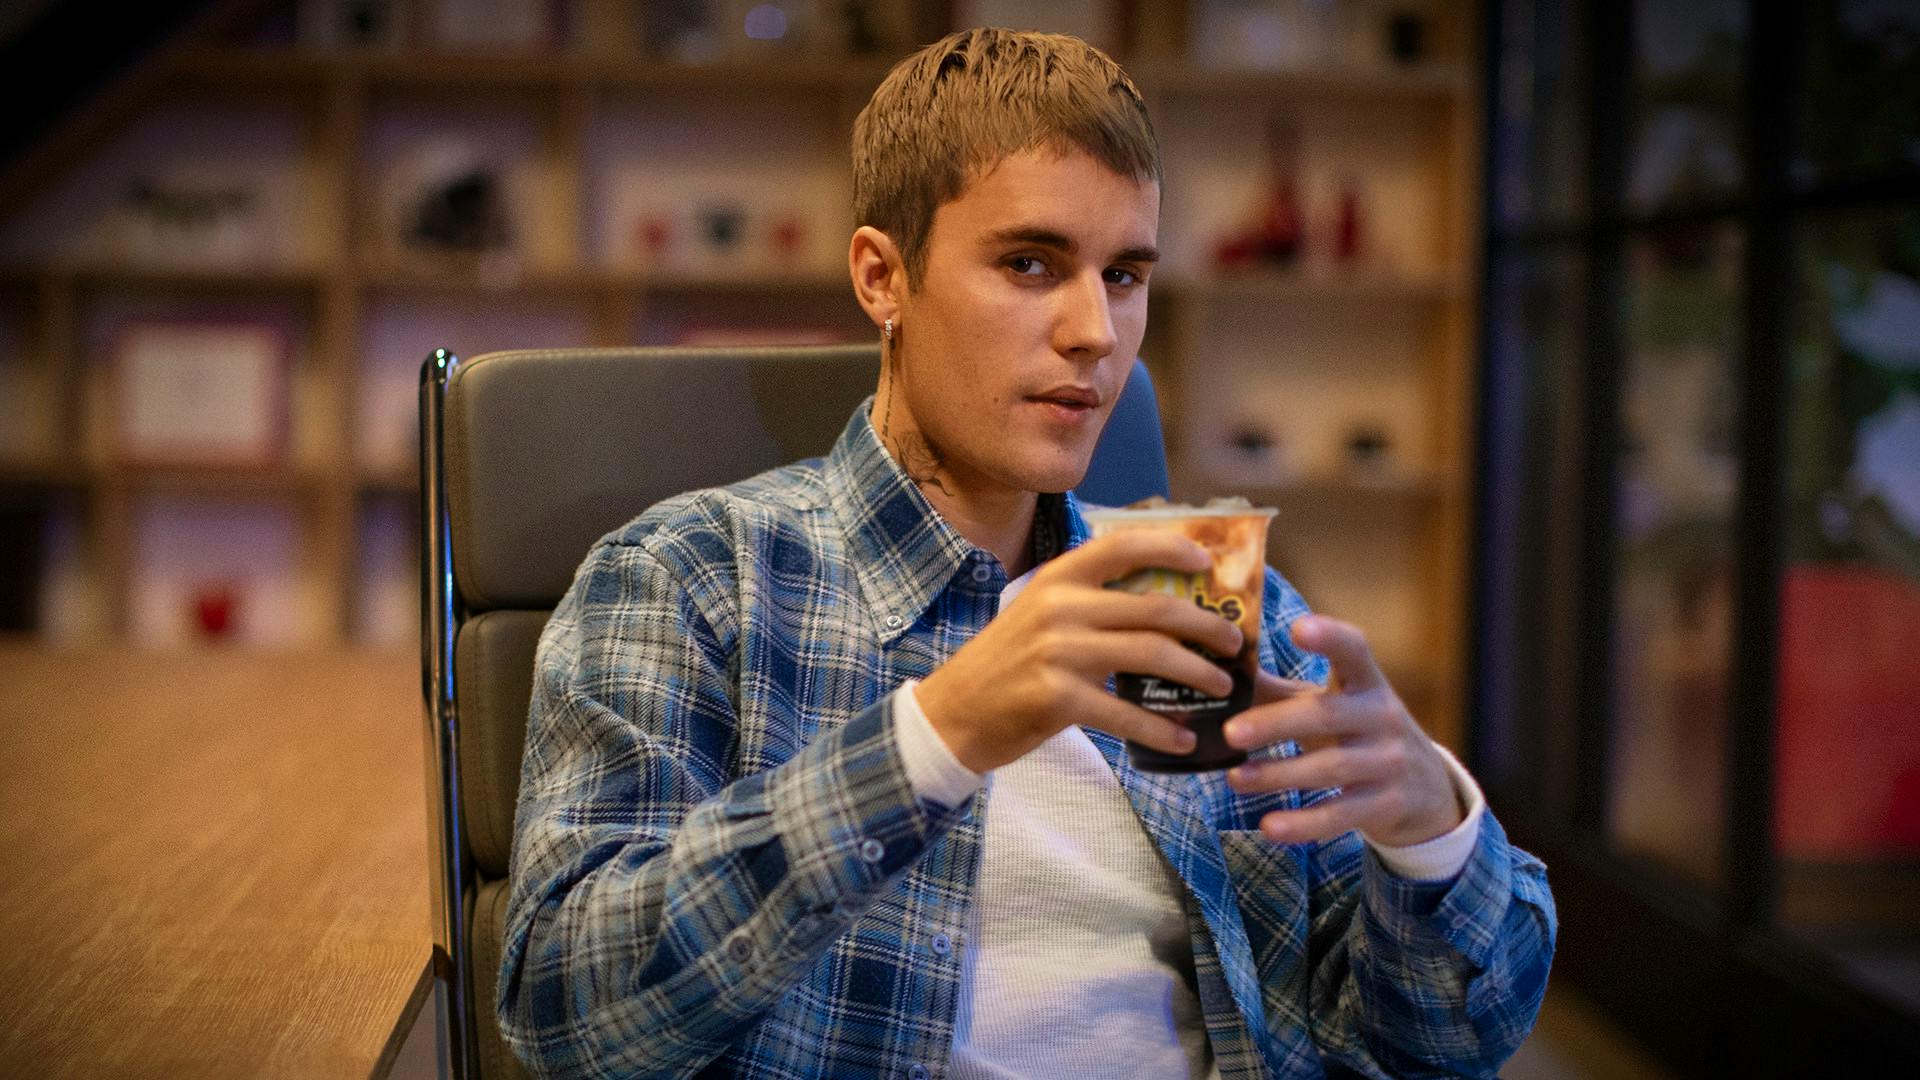 Tim Hortons receives boost from Bieber partnership, grilled wraps